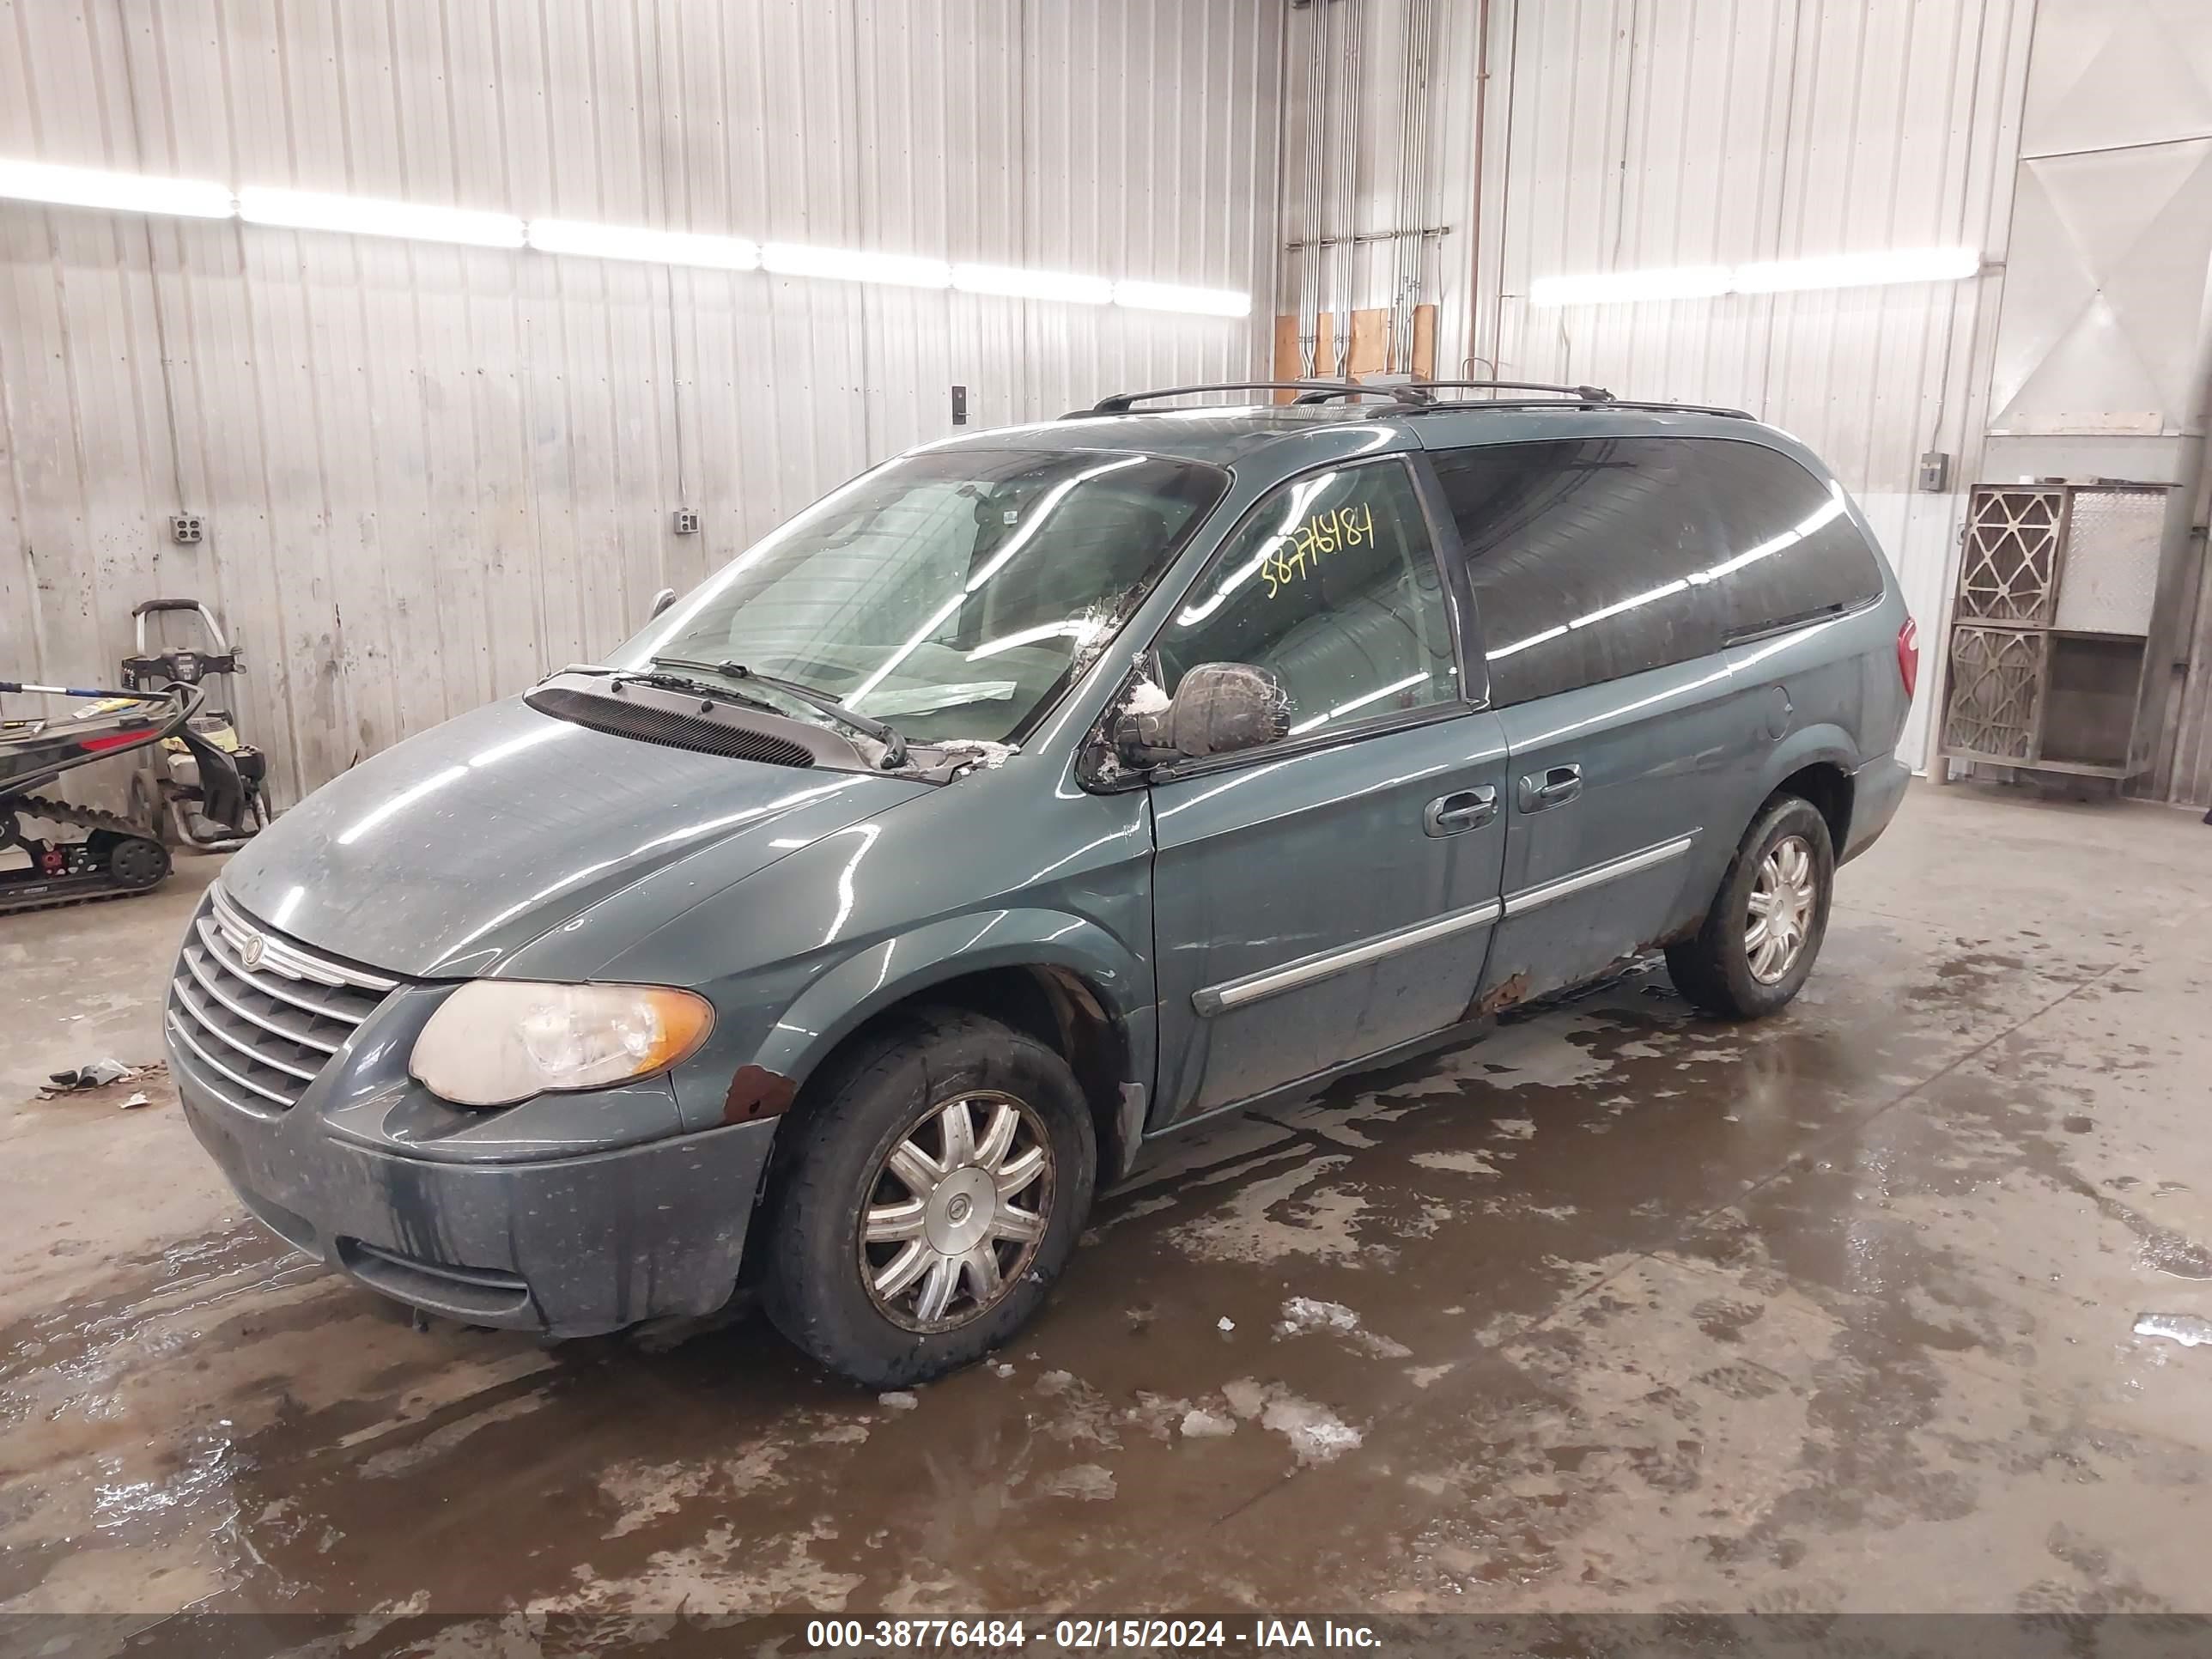 2A4GP54L56R858133  - CHRYSLER TOWN & COUNTRY  2006 IMG - 1